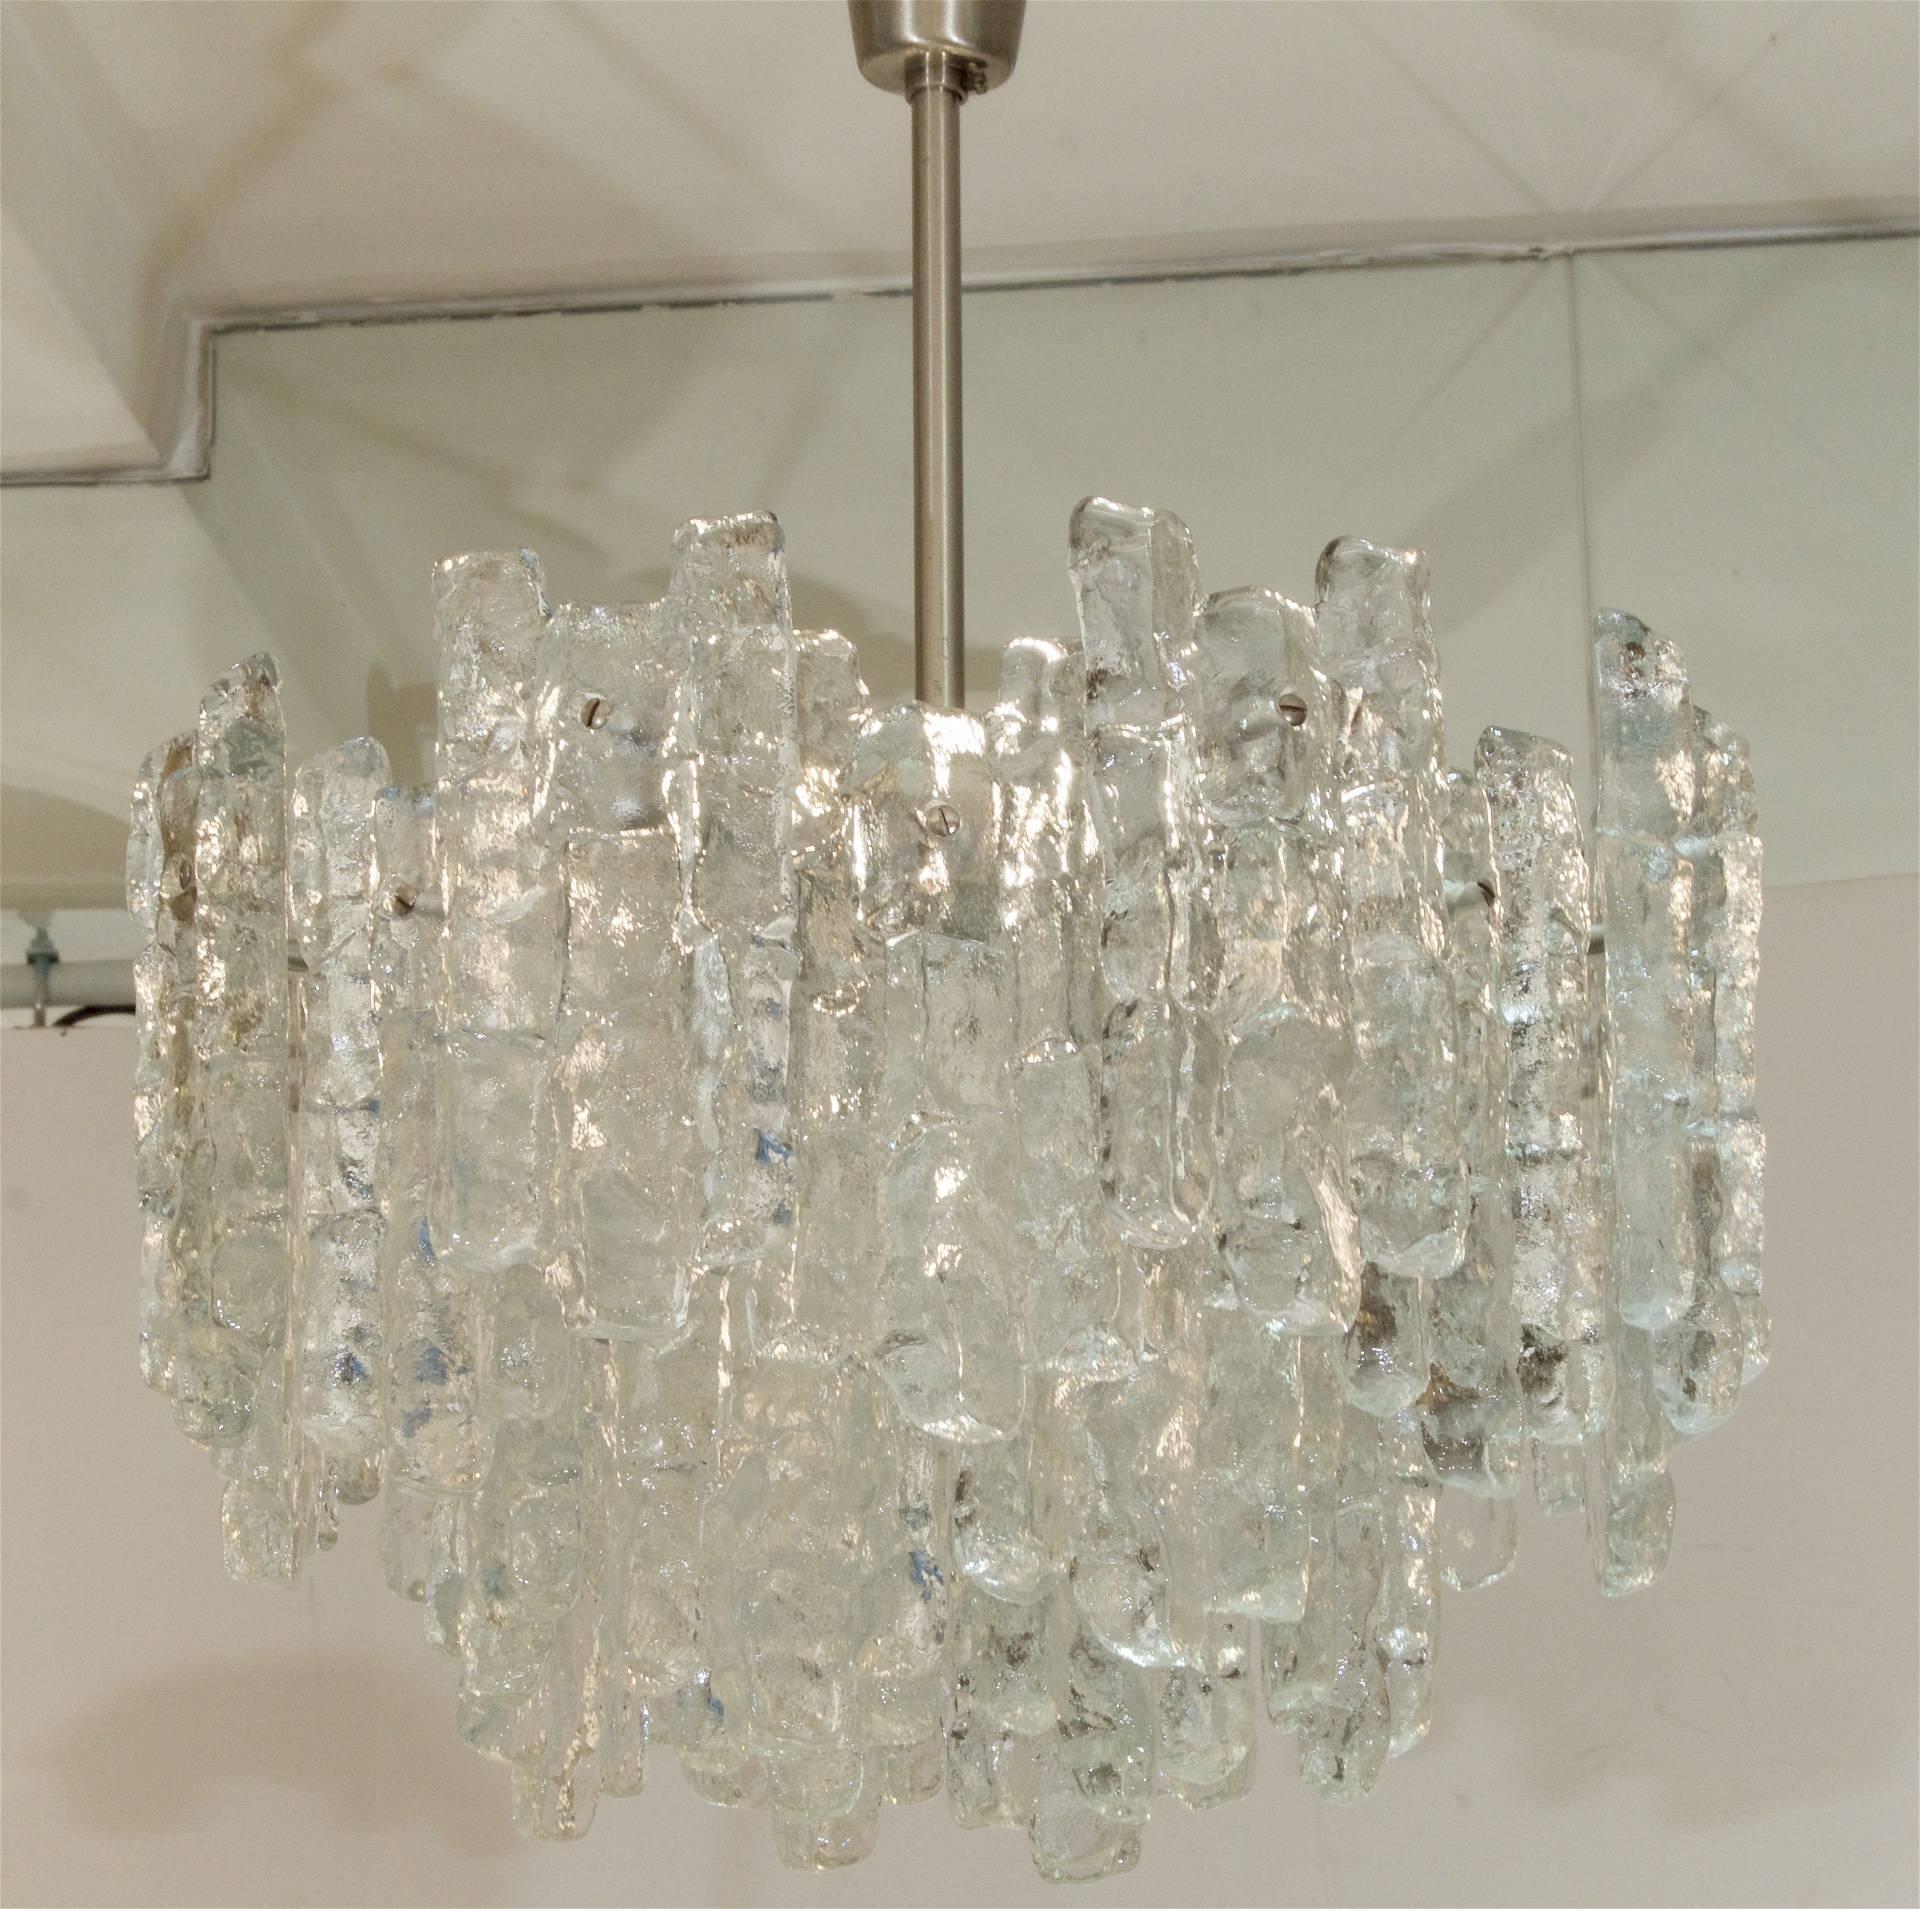 28 individual pieces of solid glass in the form of ice radiate from the body in two multiple tiers. Fixture metal is nickel tone. Largest typical format of chandelier in this glass pattern.
 
Height listed is of chandelier body only, height as